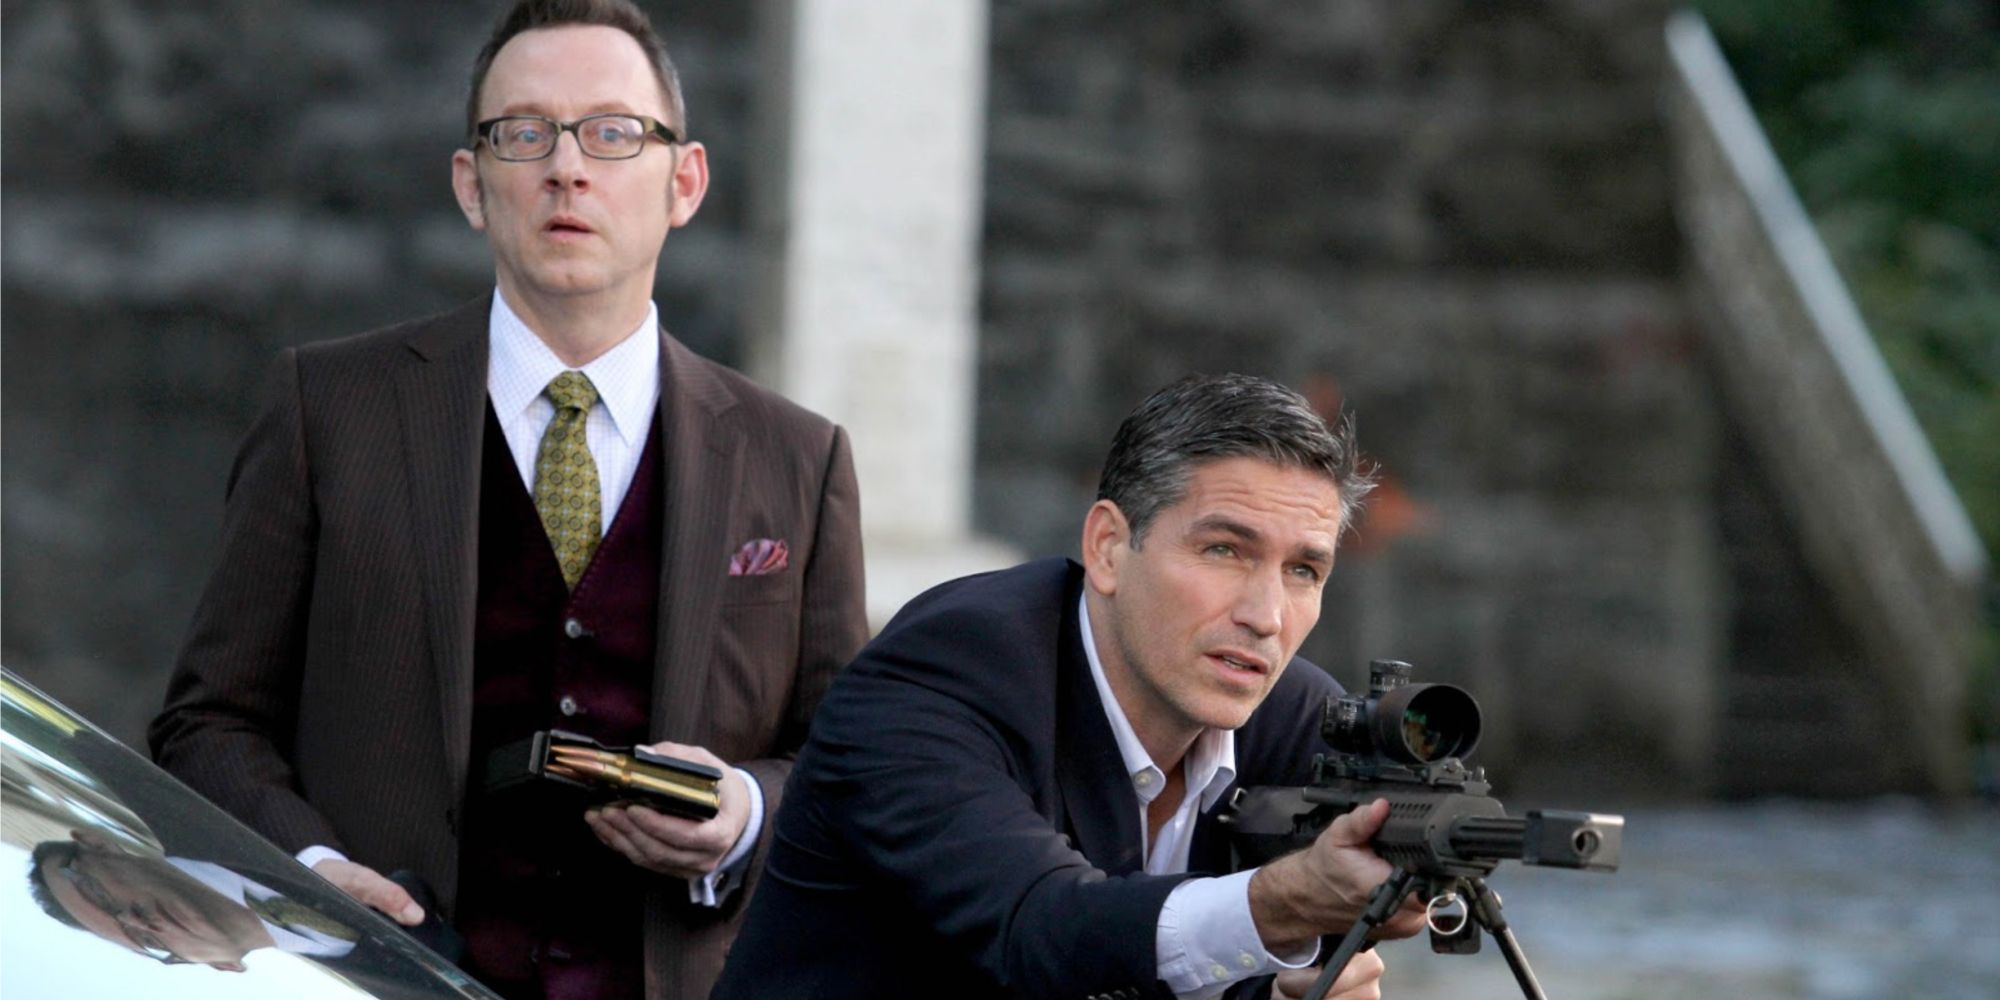 Person Of Interest combines procedural drama and science fiction